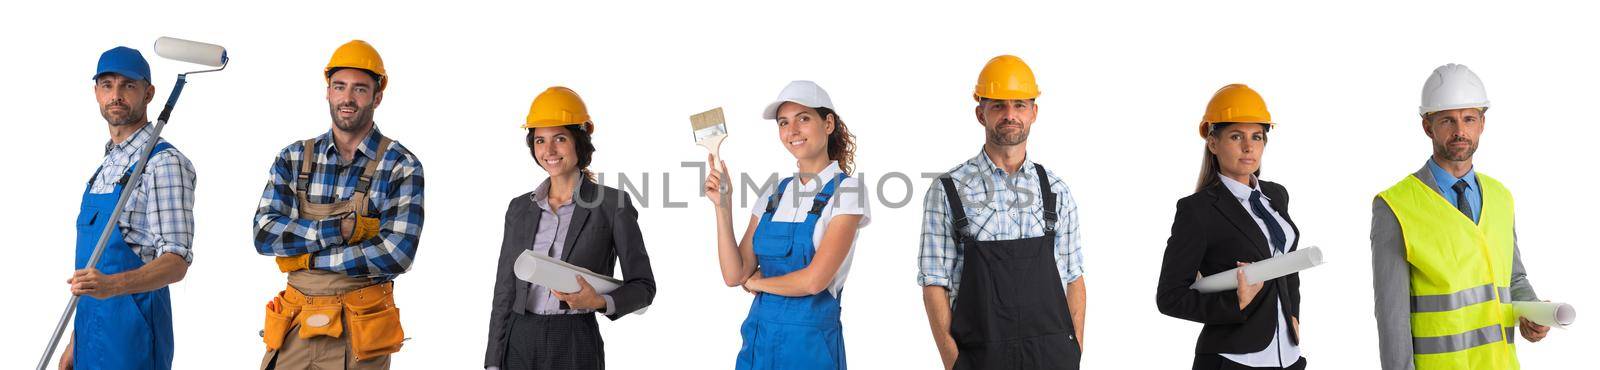 Set of professional workers by ALotOfPeople